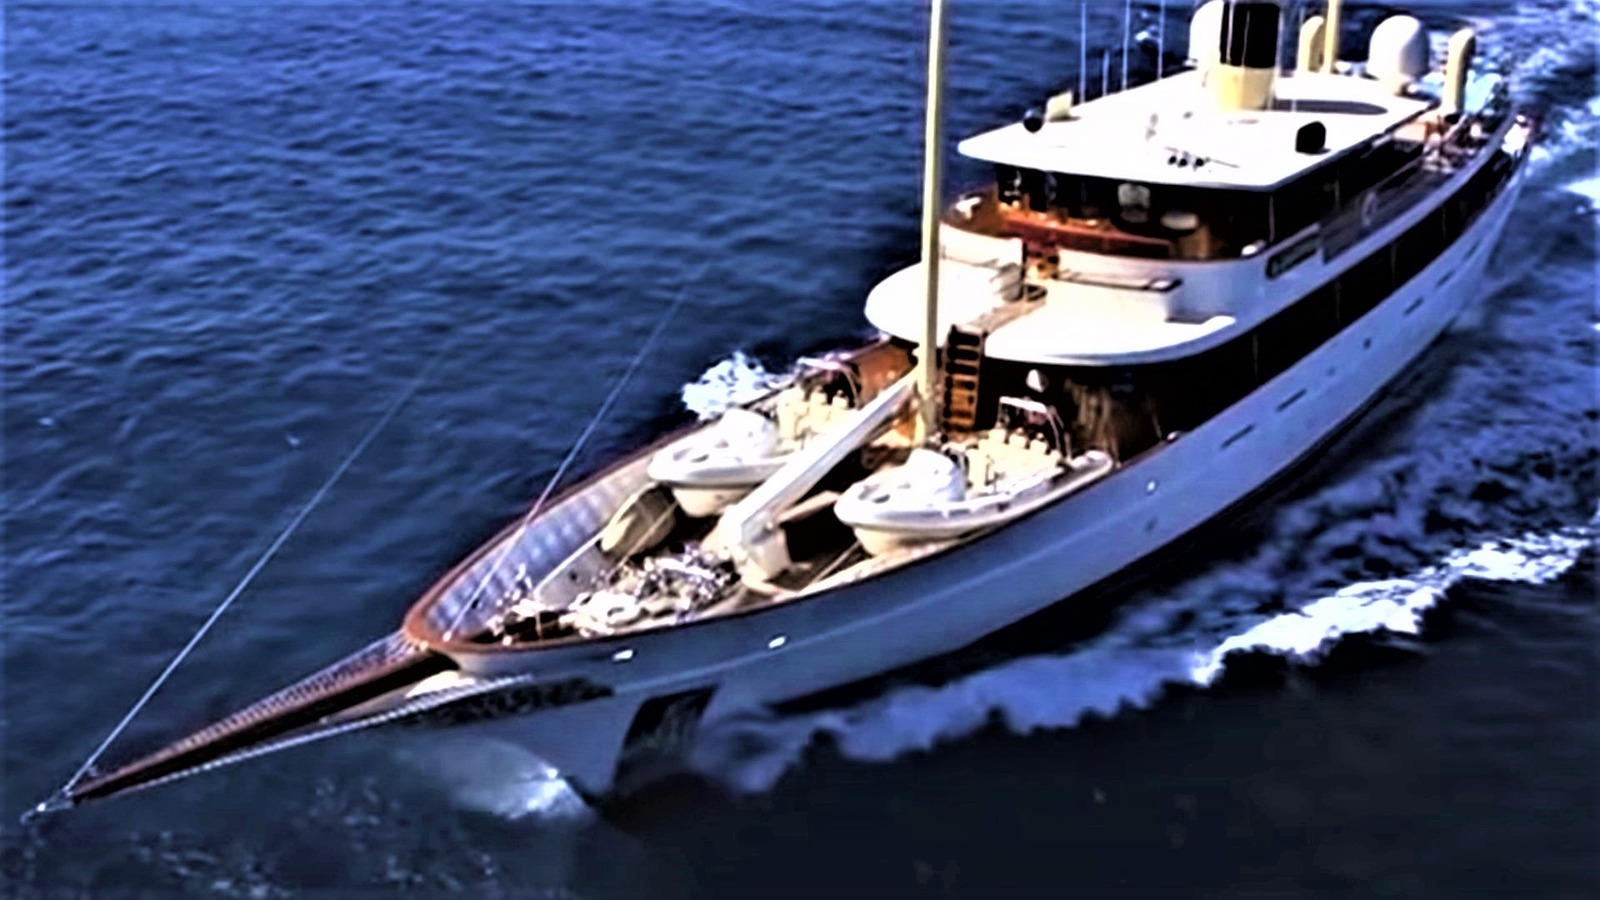 The Most Outrageous Features Of Johnny Depp’s Former Pirate-Themed Superyacht